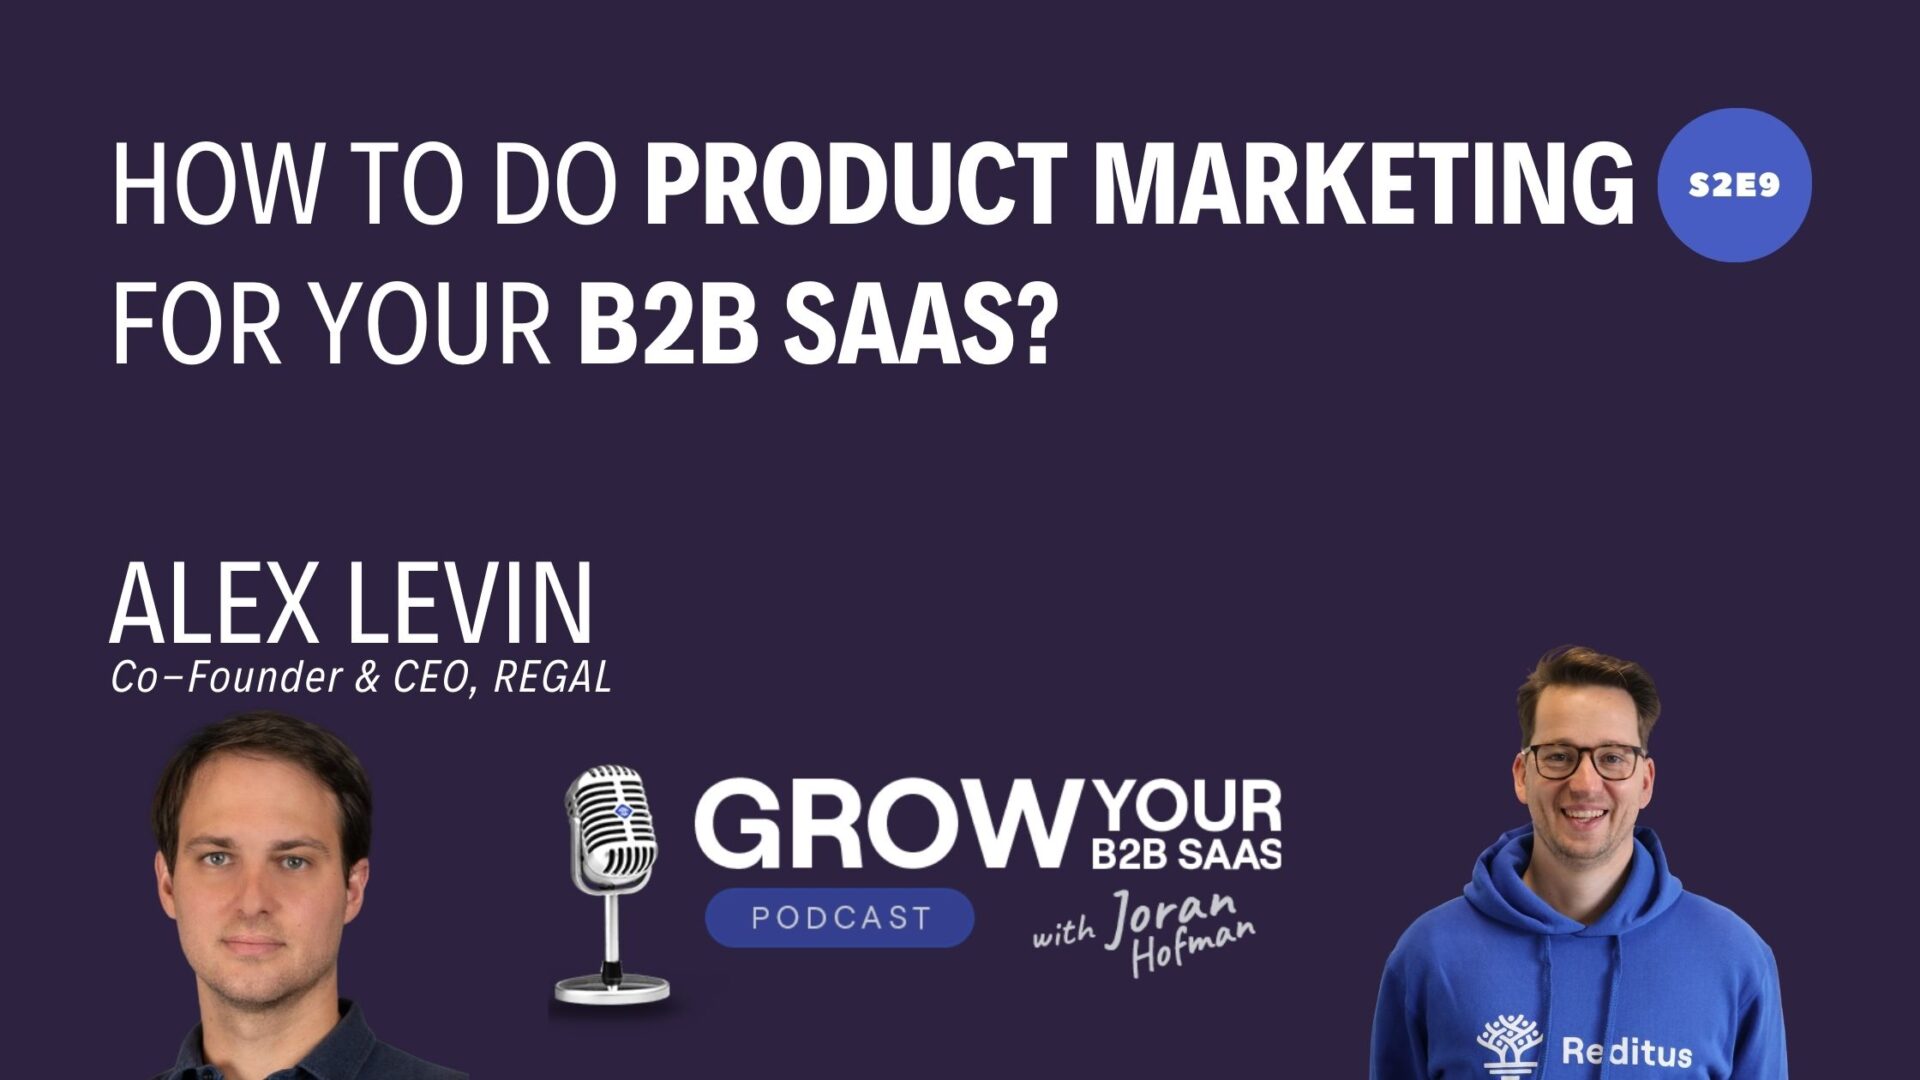 S2E9 – How to do product marketing for your B2B SaaS? With Alex Levin